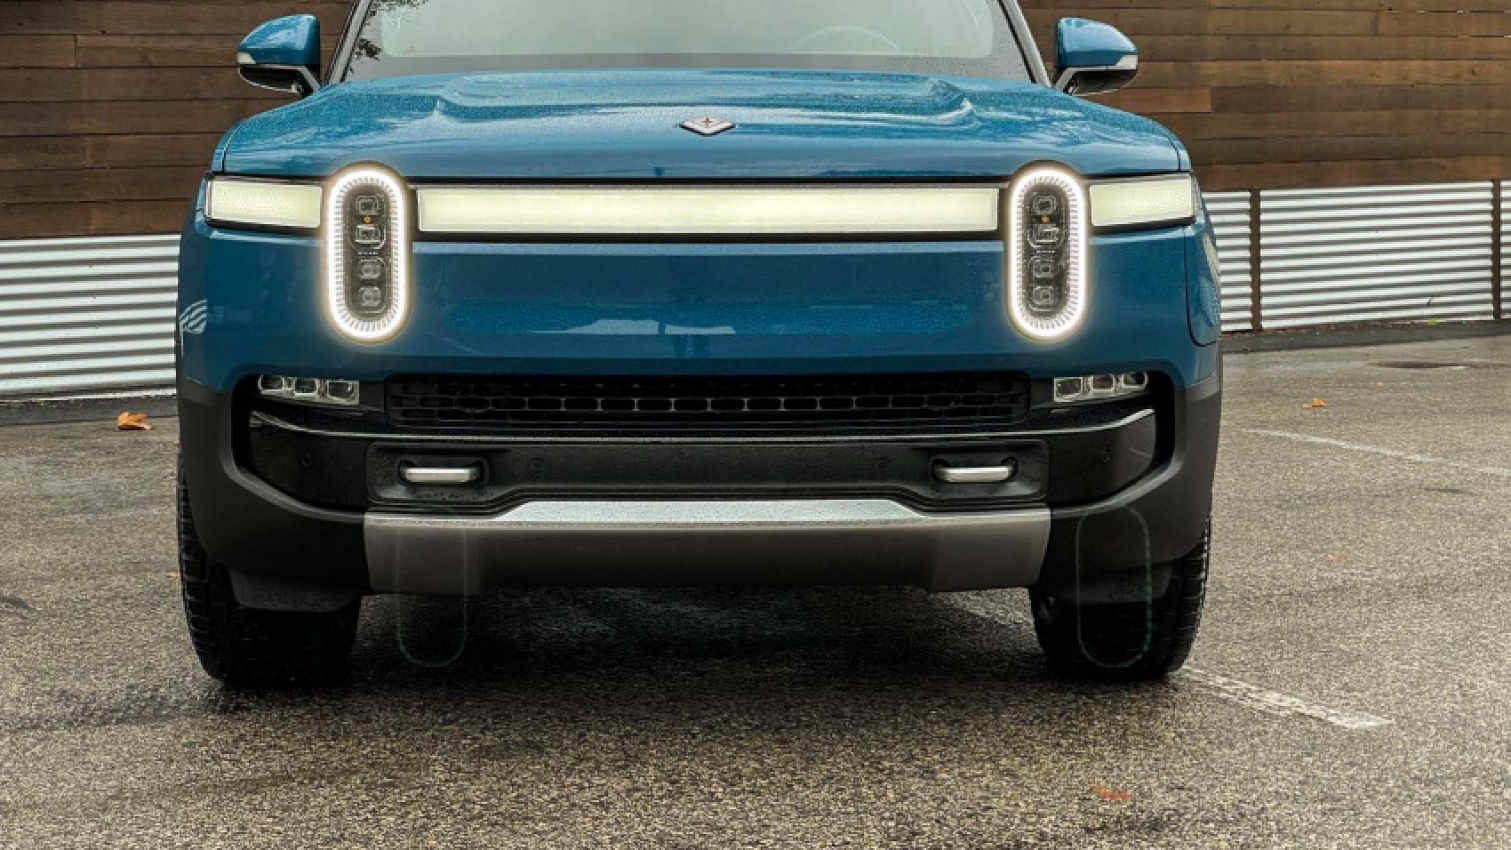 autos, cars, rivian, electric cars, rivian news, rivian raises prices for r1t and r1s electric trucks by up to $12,000, adds dual-motor versions